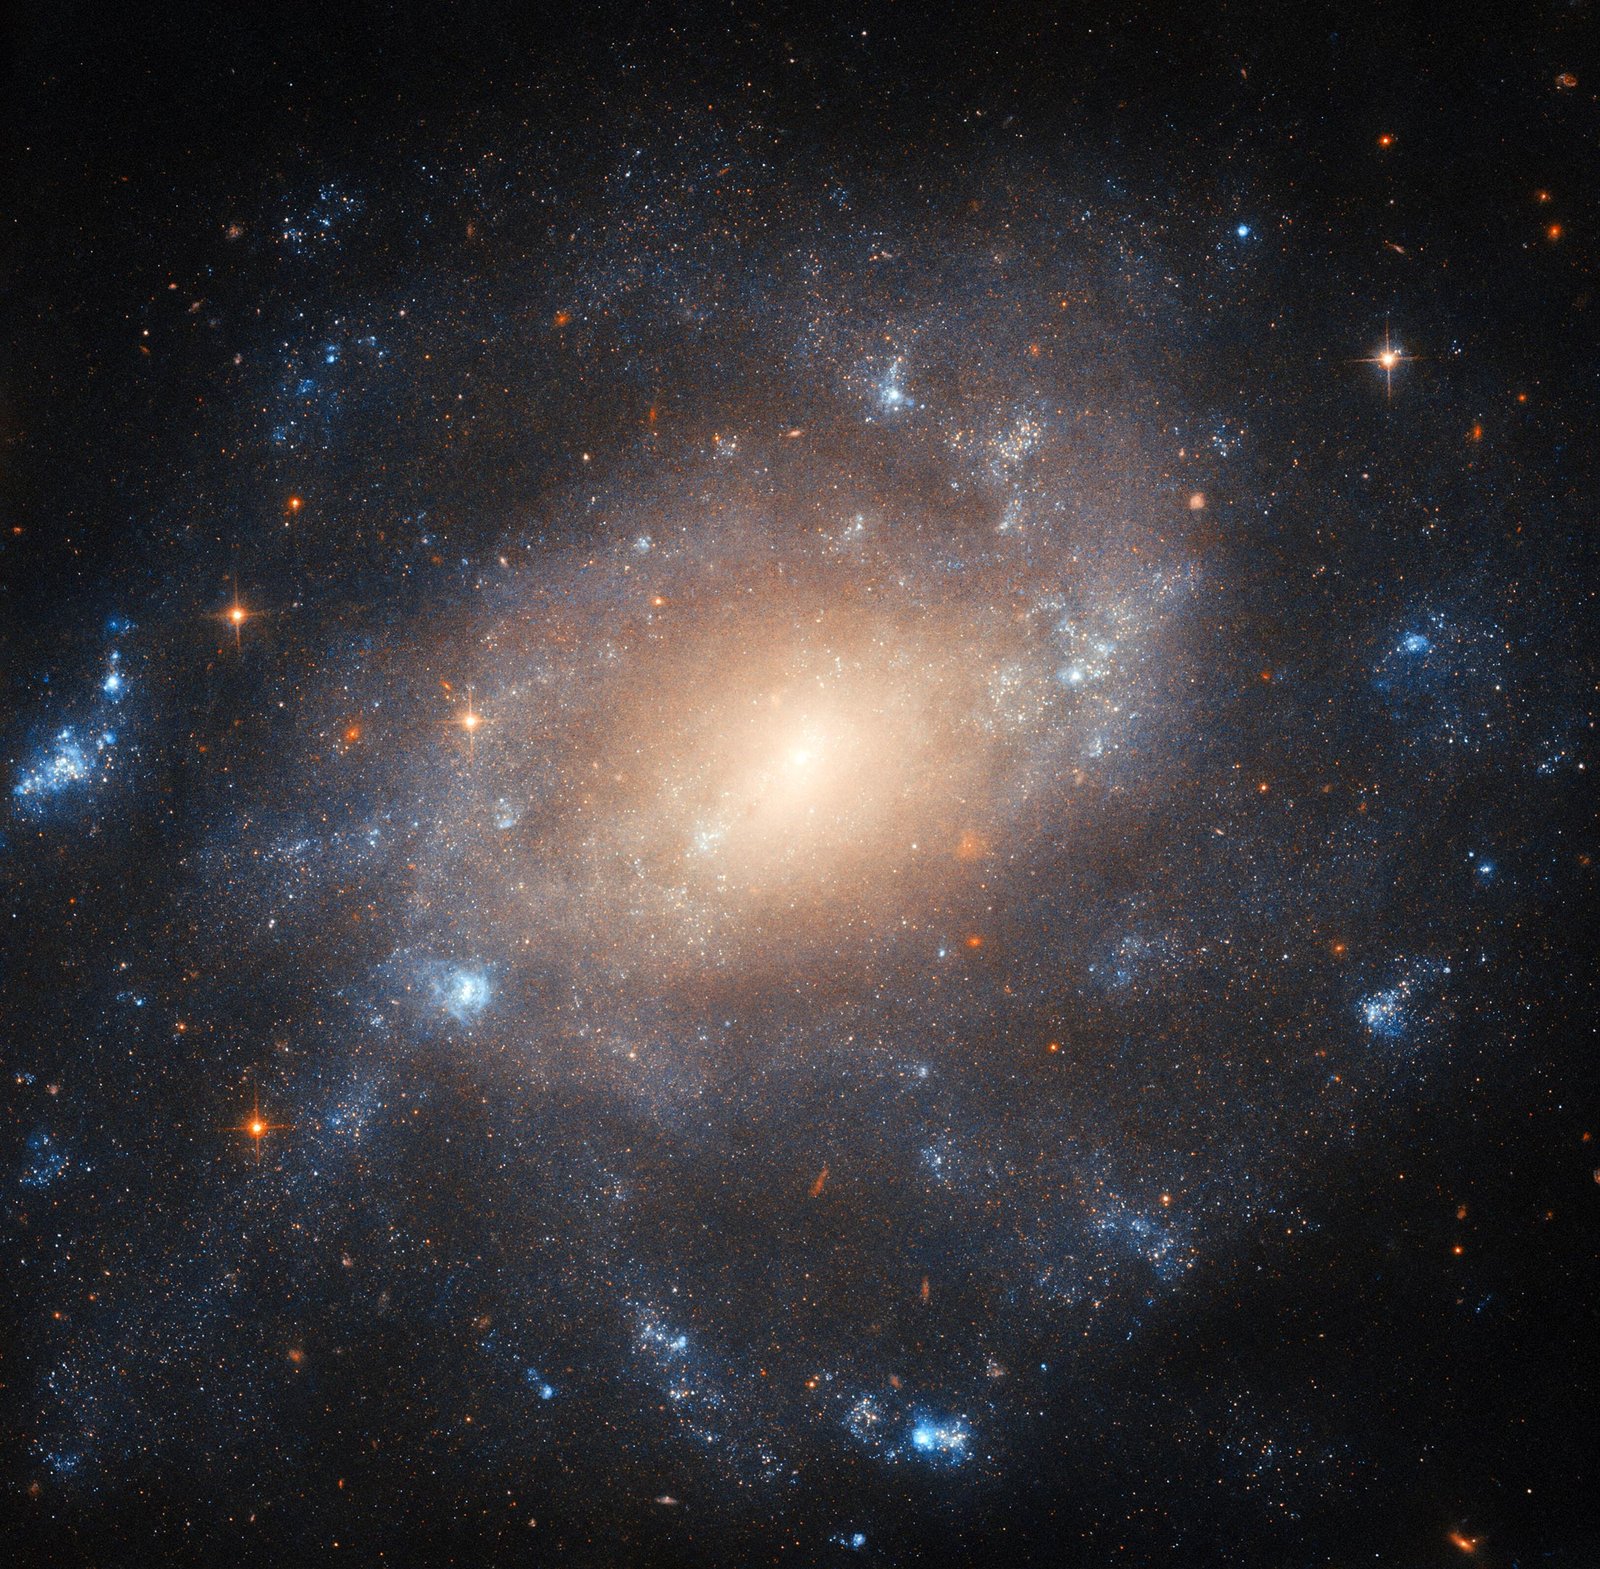 Hubble Unmasks the Luminous Core of a Historic Spiral Galaxy